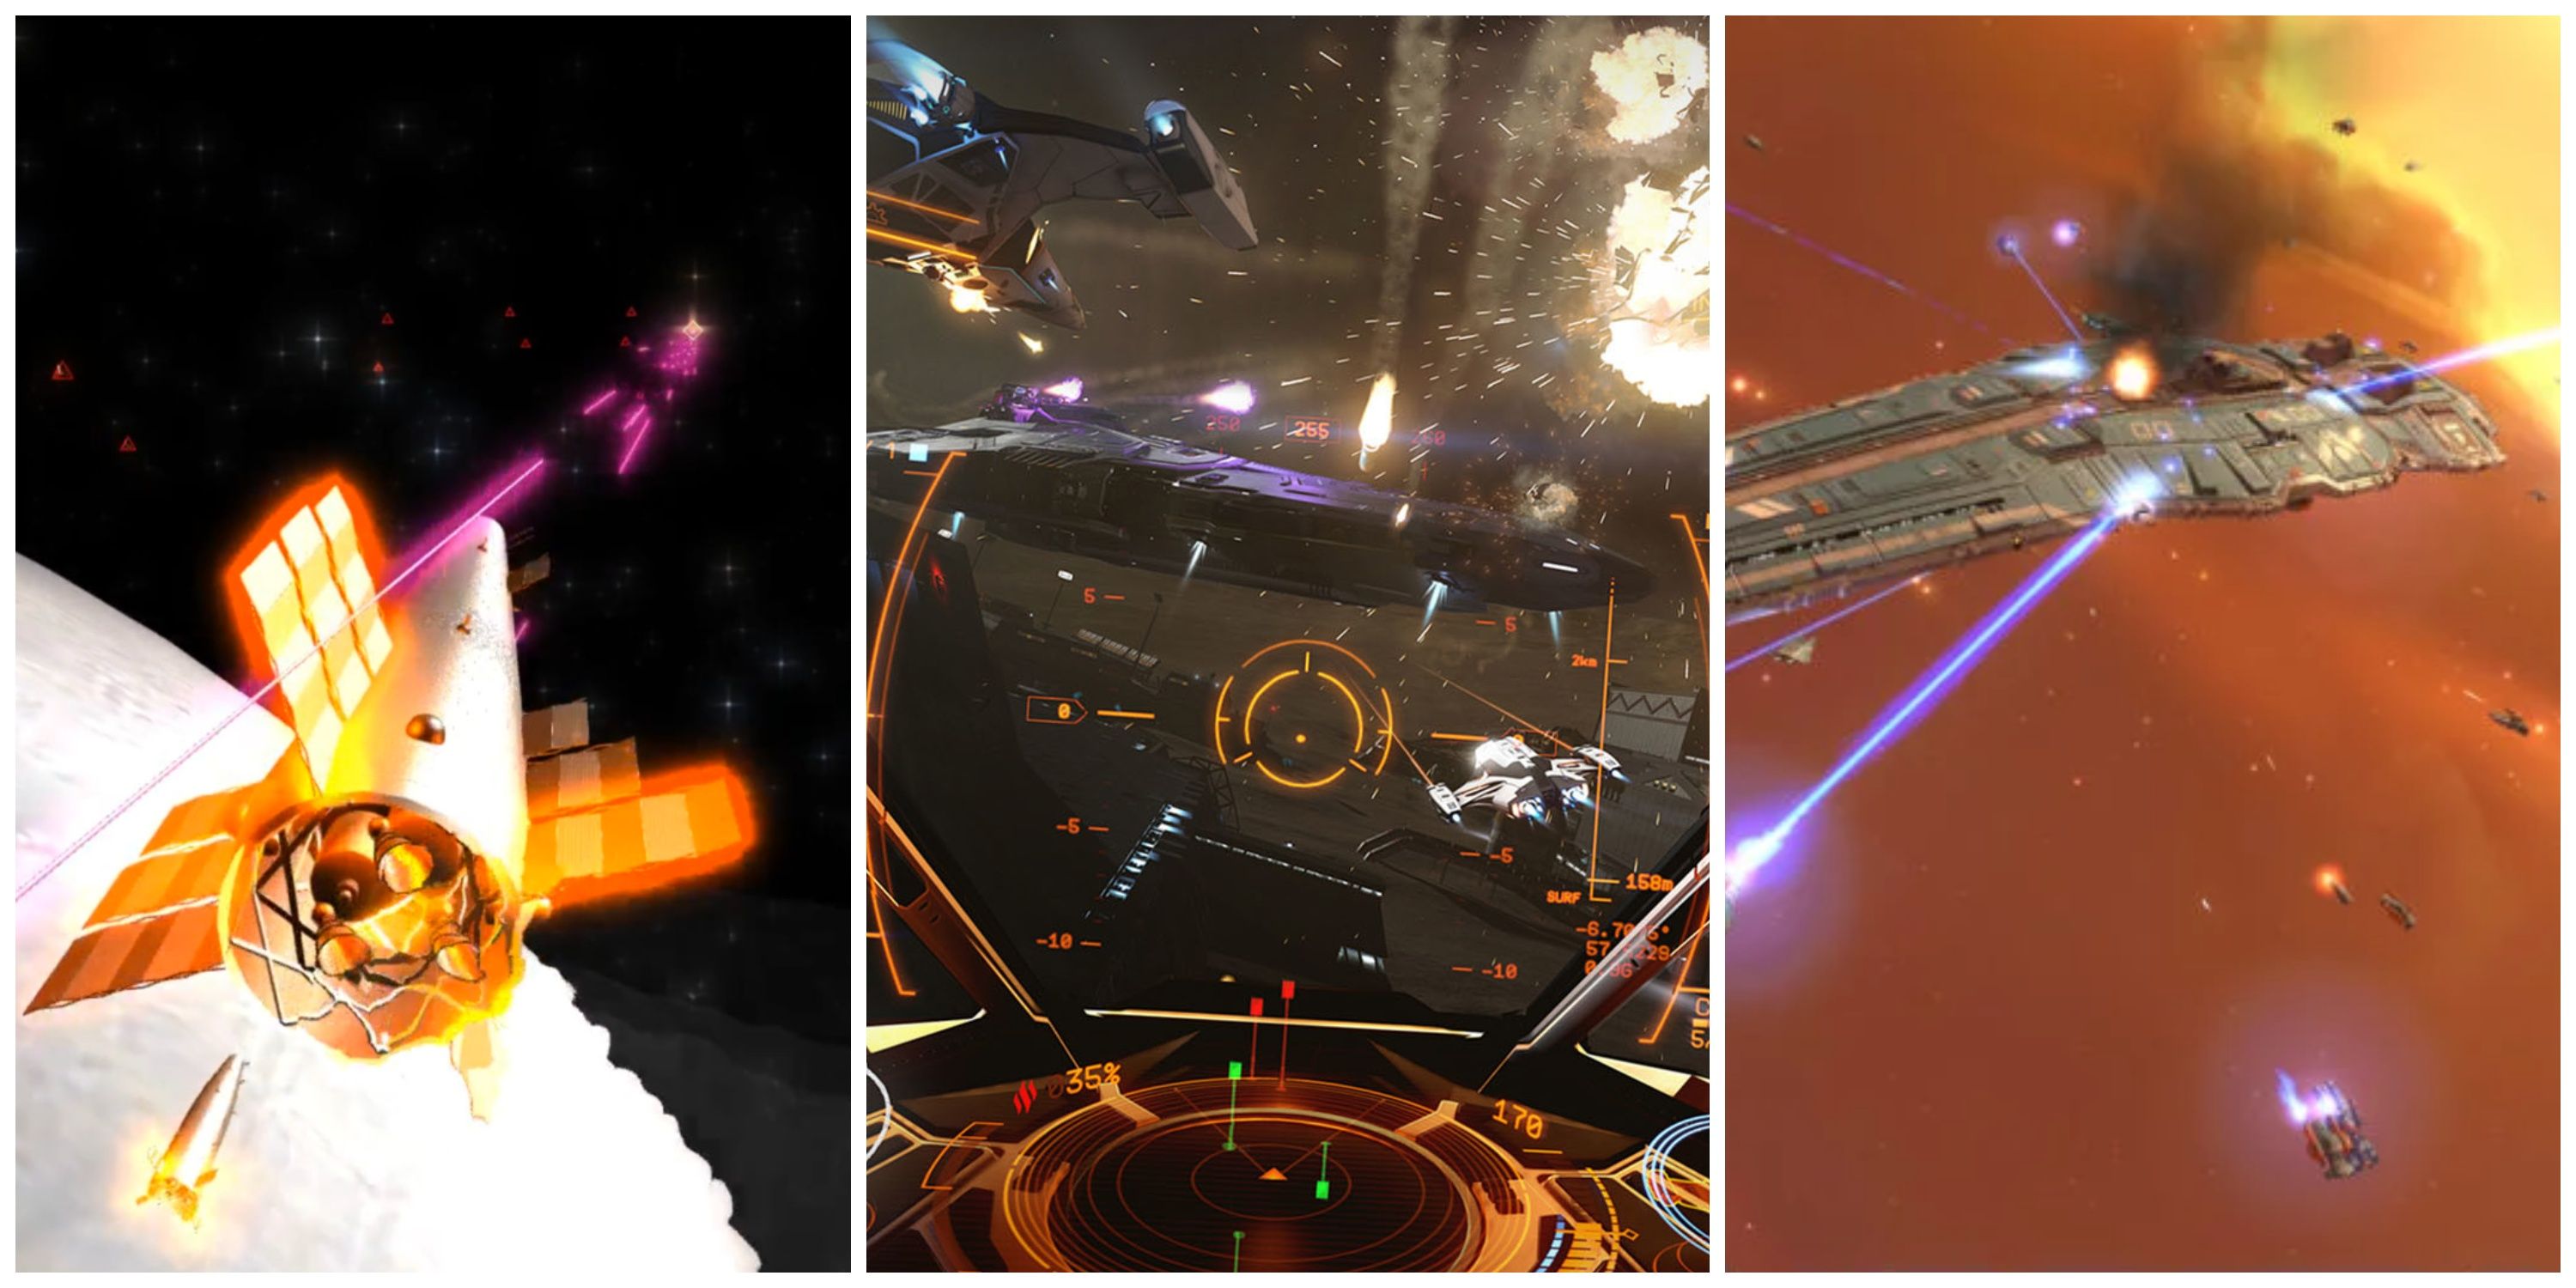 Sci-Fi Games With The Best Space Combat